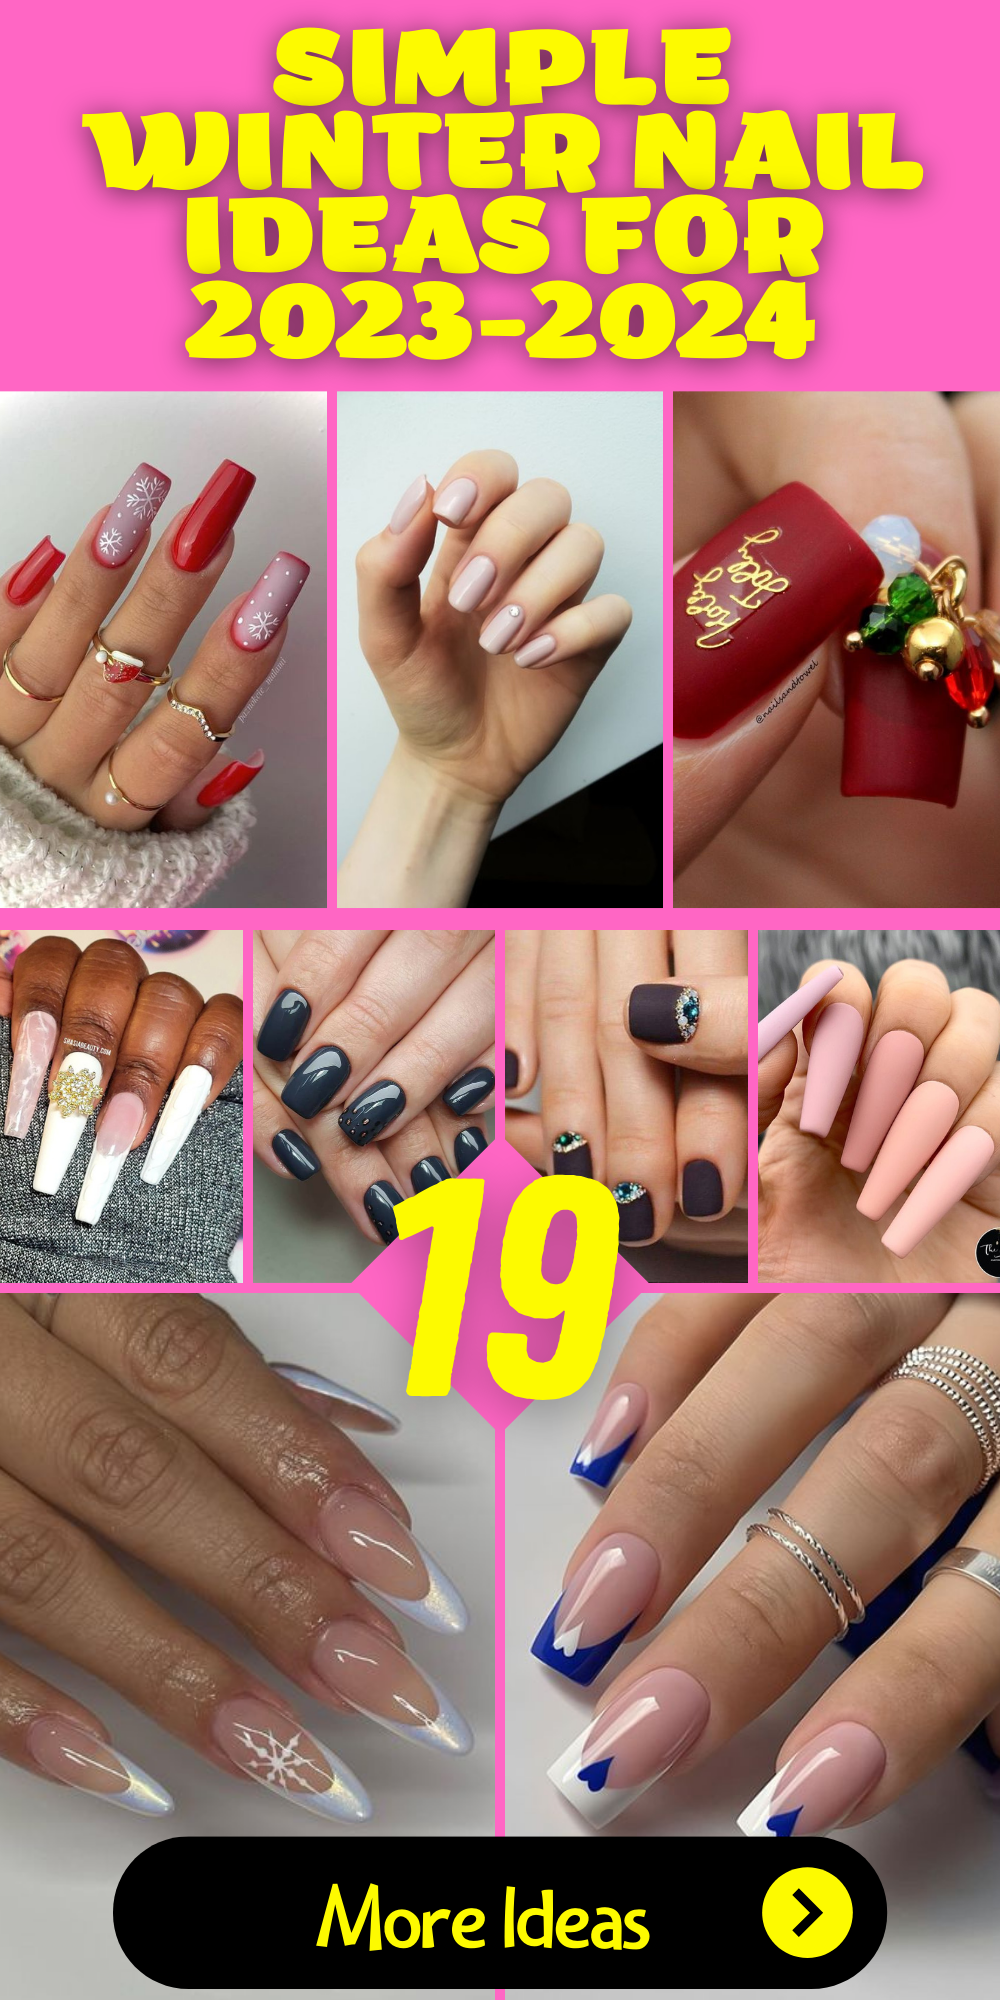 19 Simple Winter Nail Ideas for 2023-2024 - thepinkgoose.com